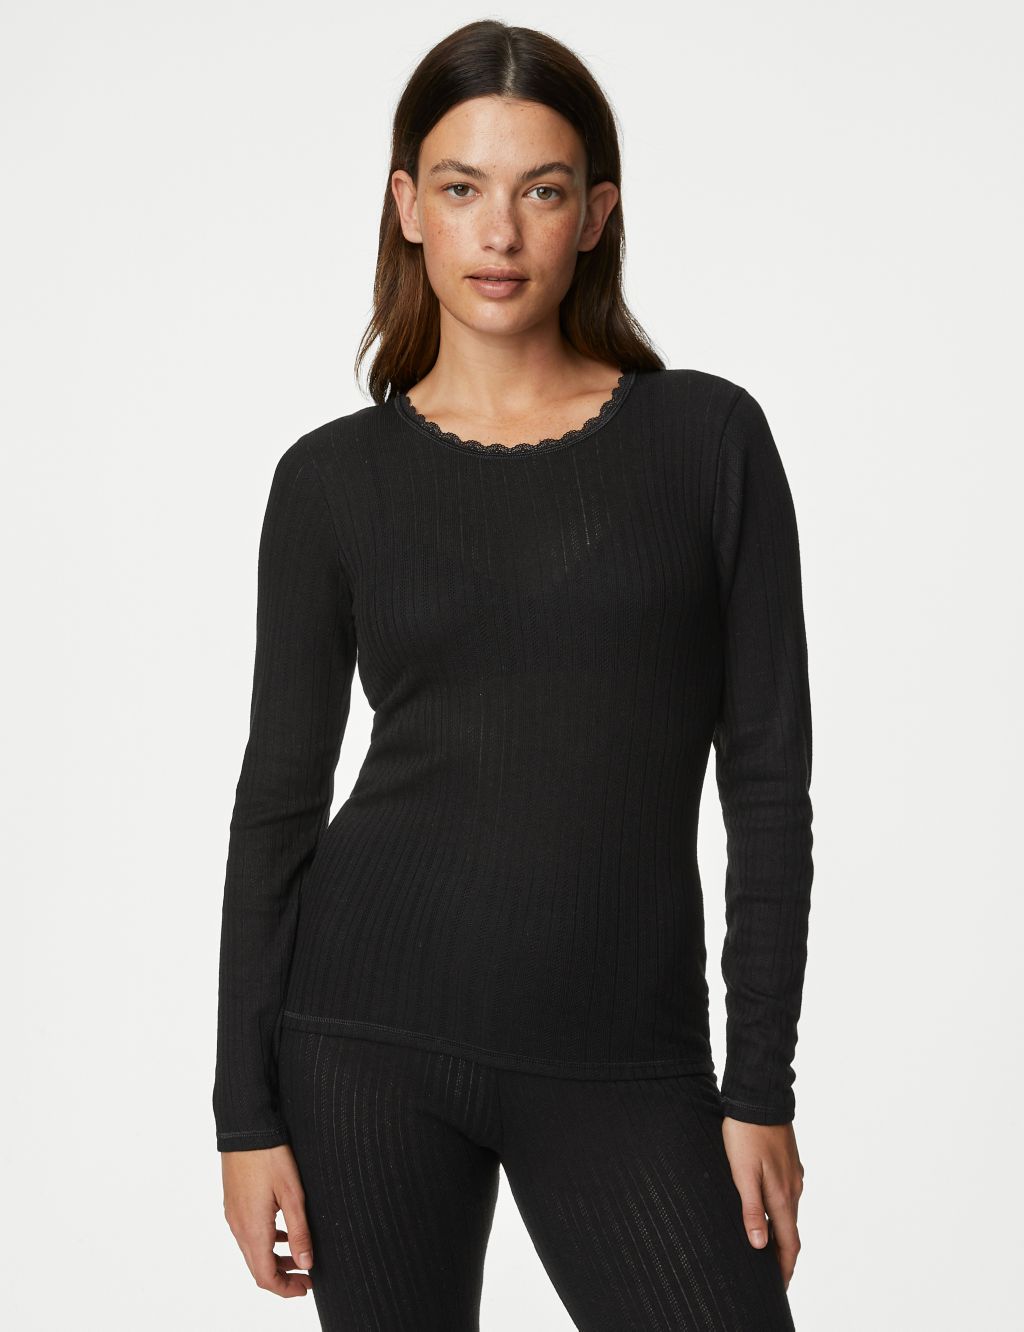 2pk Pointelle Thermal Long Sleeve Tops image 4